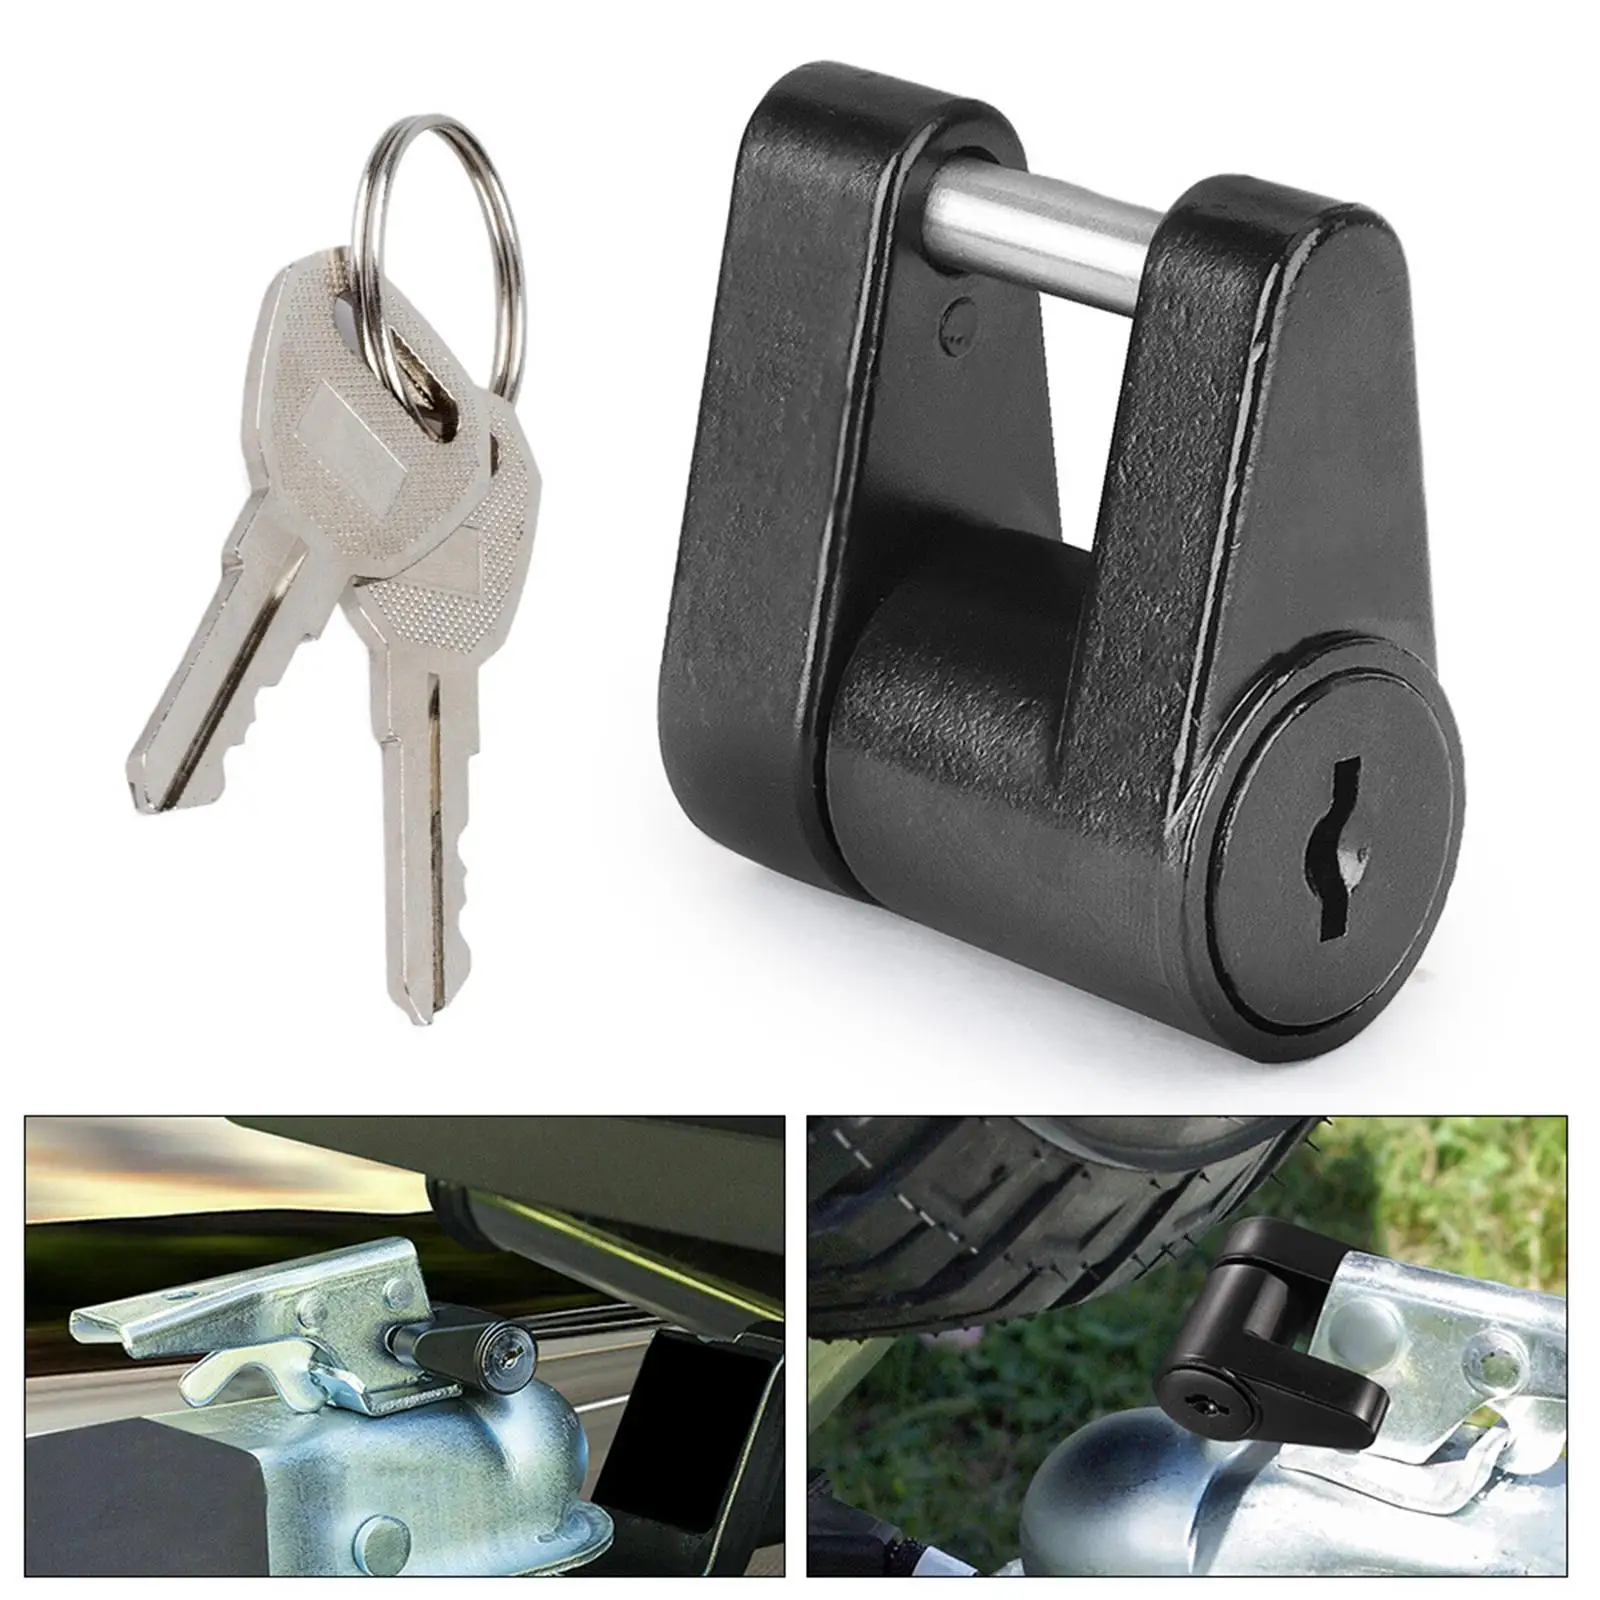 Trailer Coupler Lock with 2 Keys 1/4 inch pin 3/4 inch Span for Car`S Coupler RV Tow Boat Truck Trailers